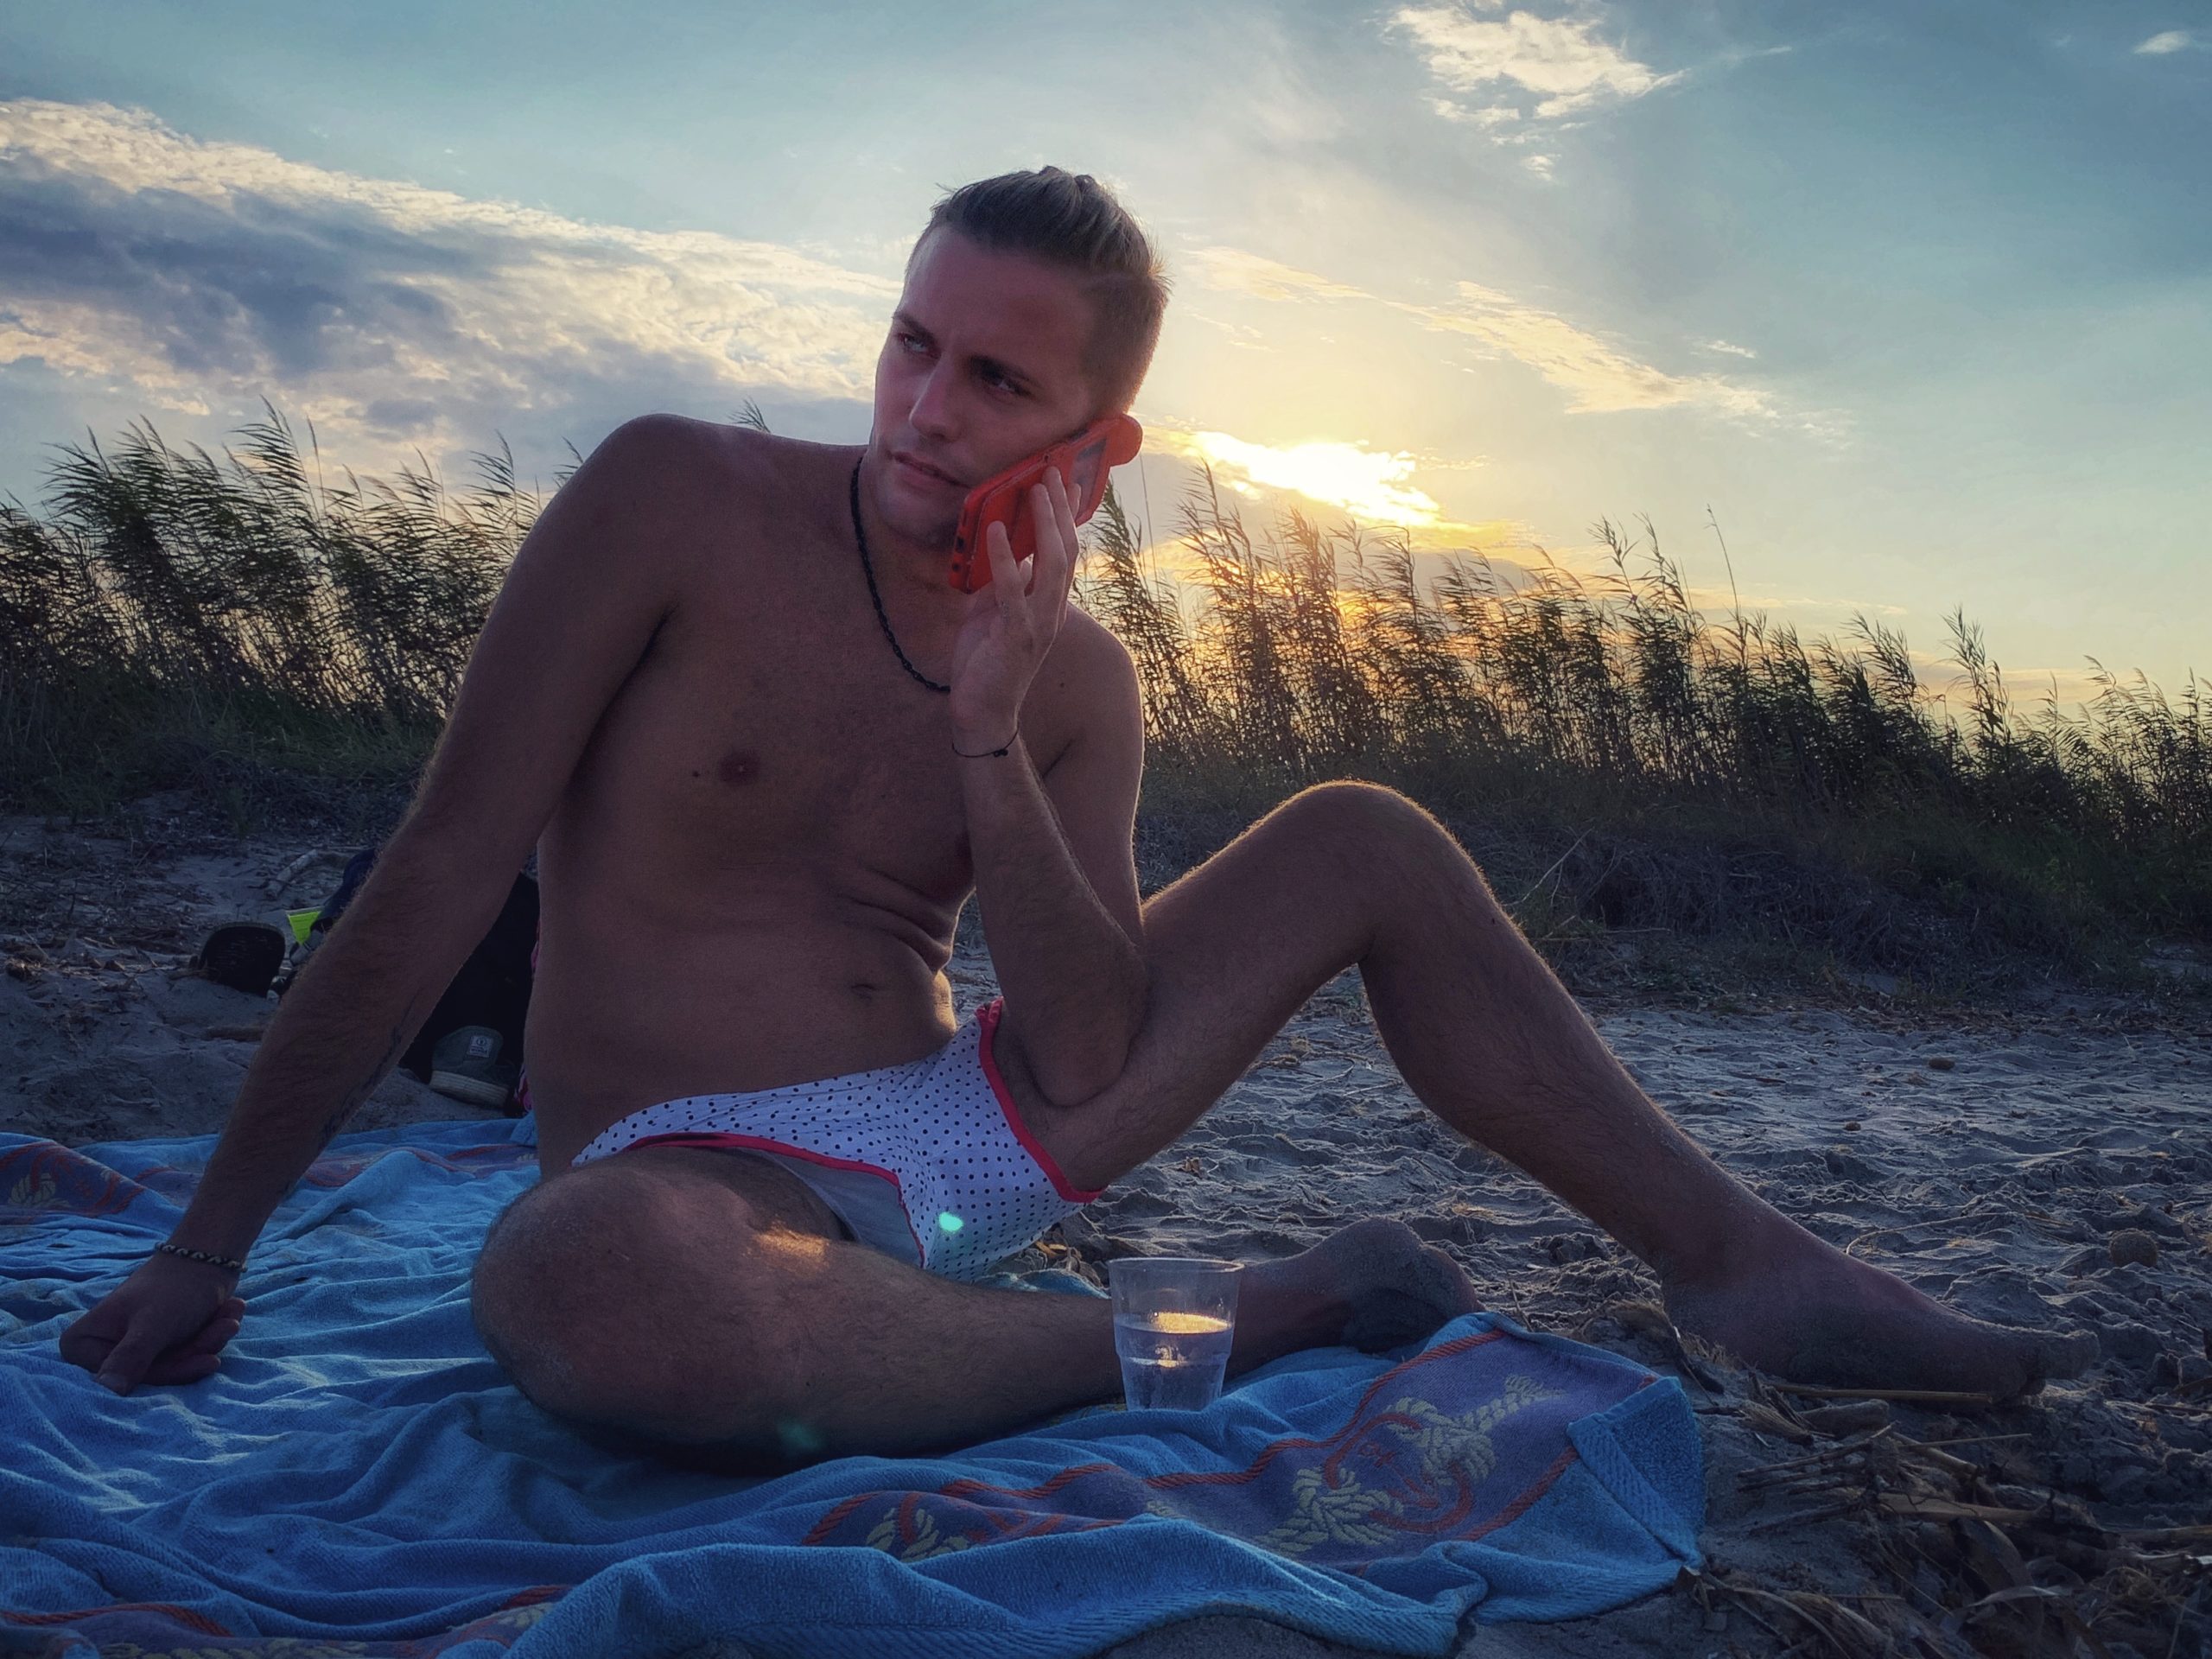 Torre Guaceto gay beach guide, Ostuni The Big Gay Podcast from Puglia